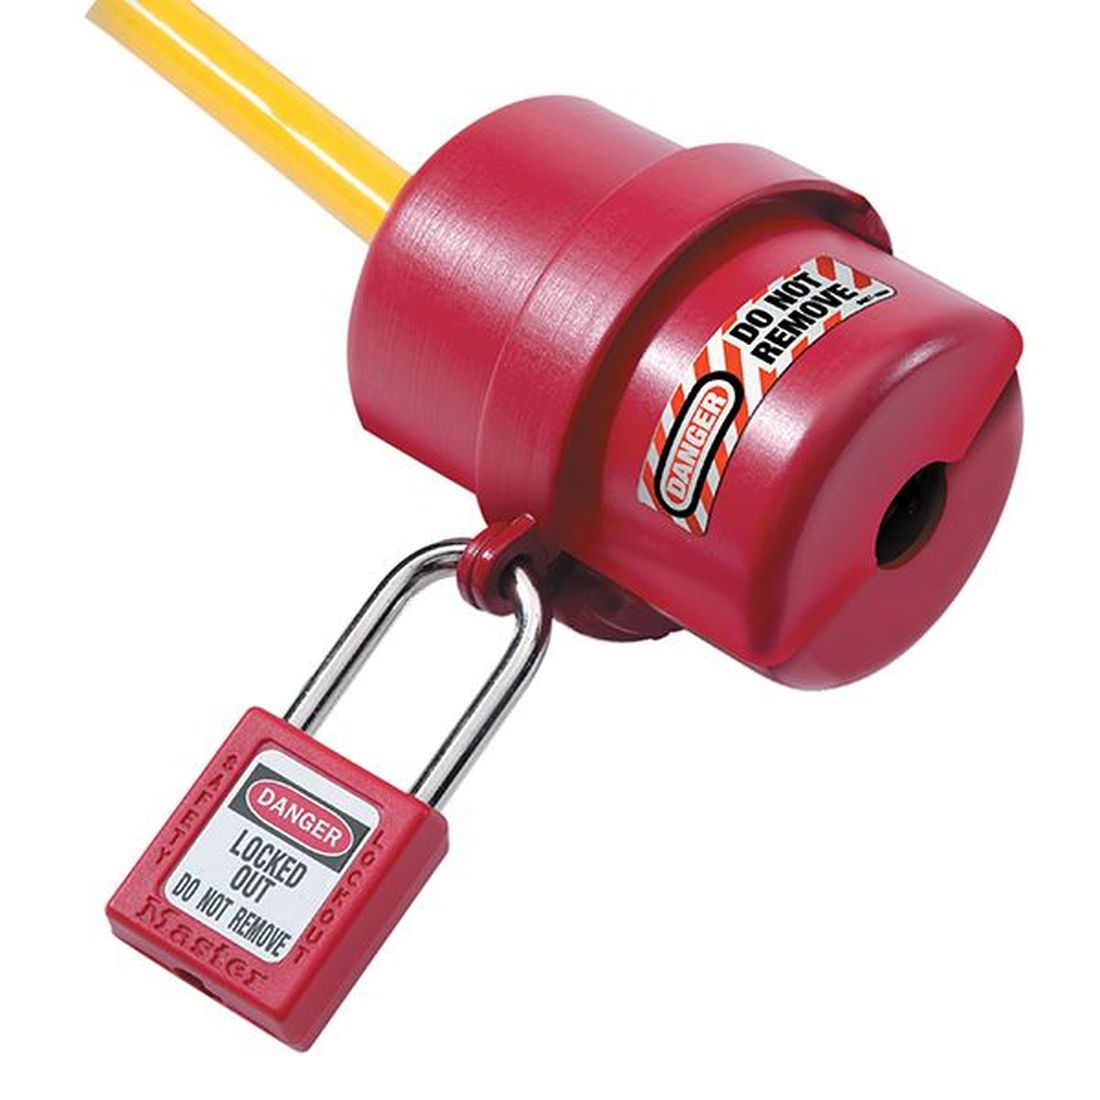 Master Lock Lockout Electrical Plug Cover Small for 120V - 240V                             